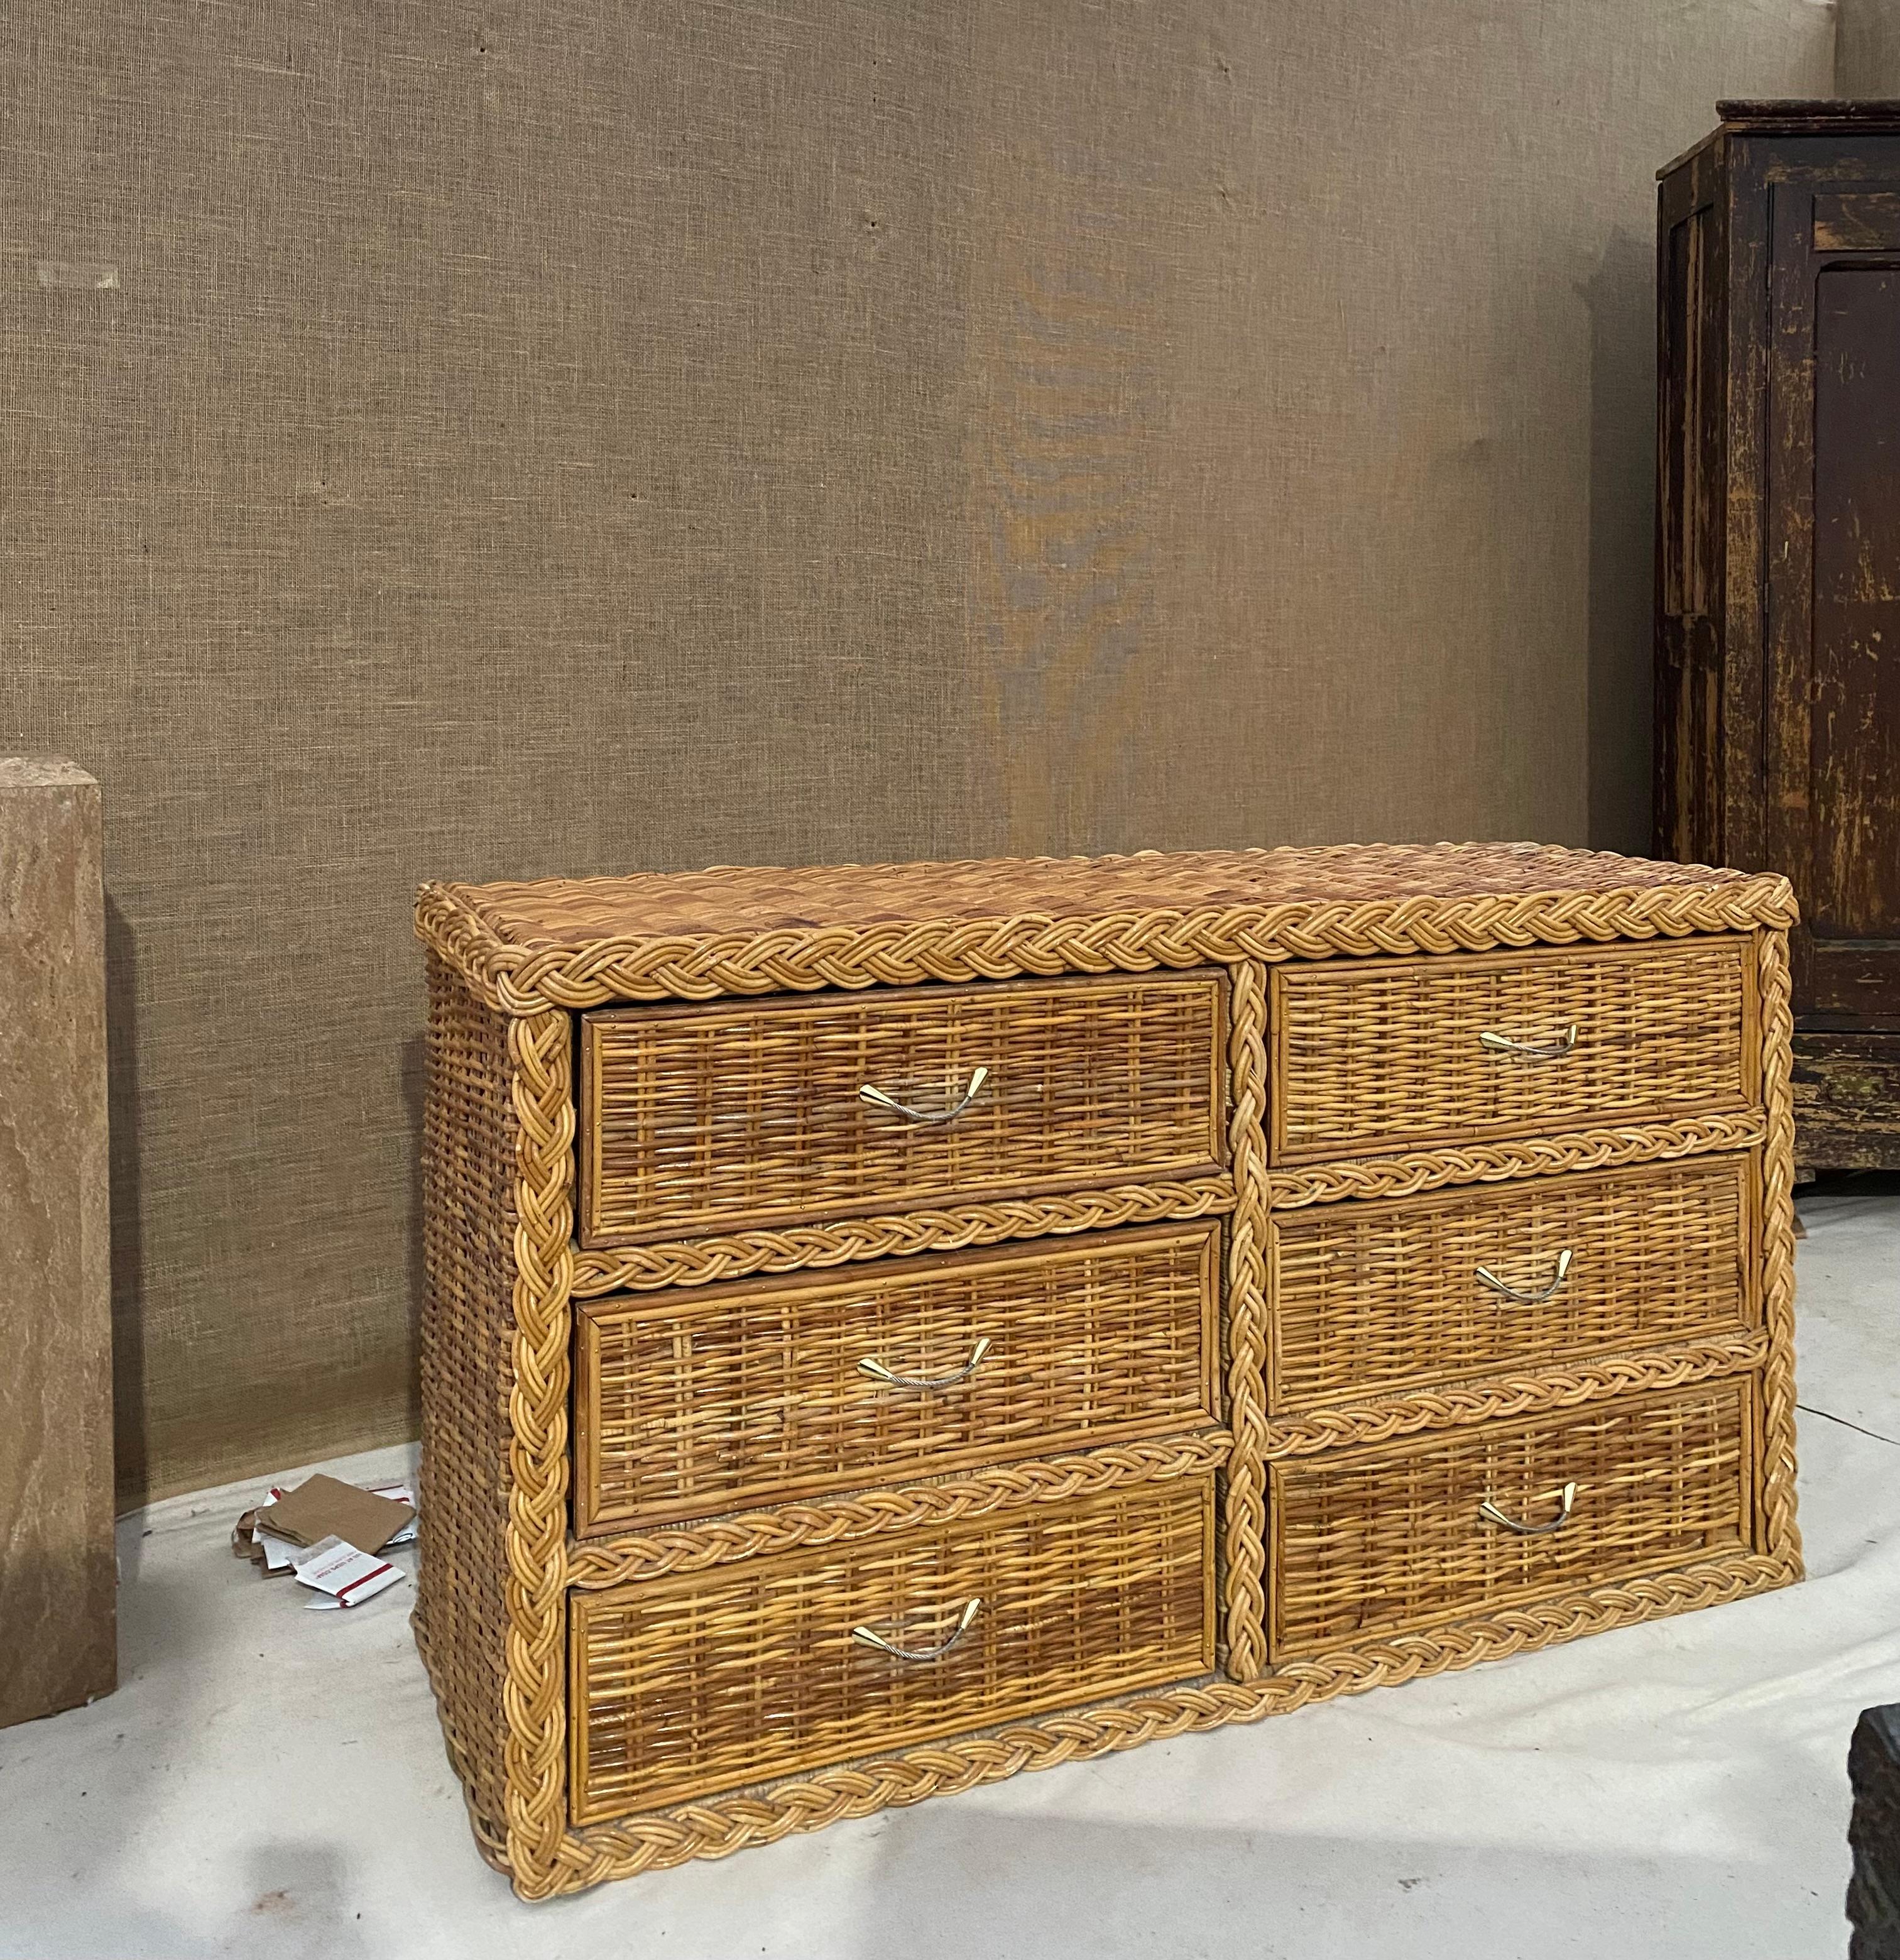 Campaign Braided Rattan 6 Drawer Dresser (After Bielecky Brothers) For Sale